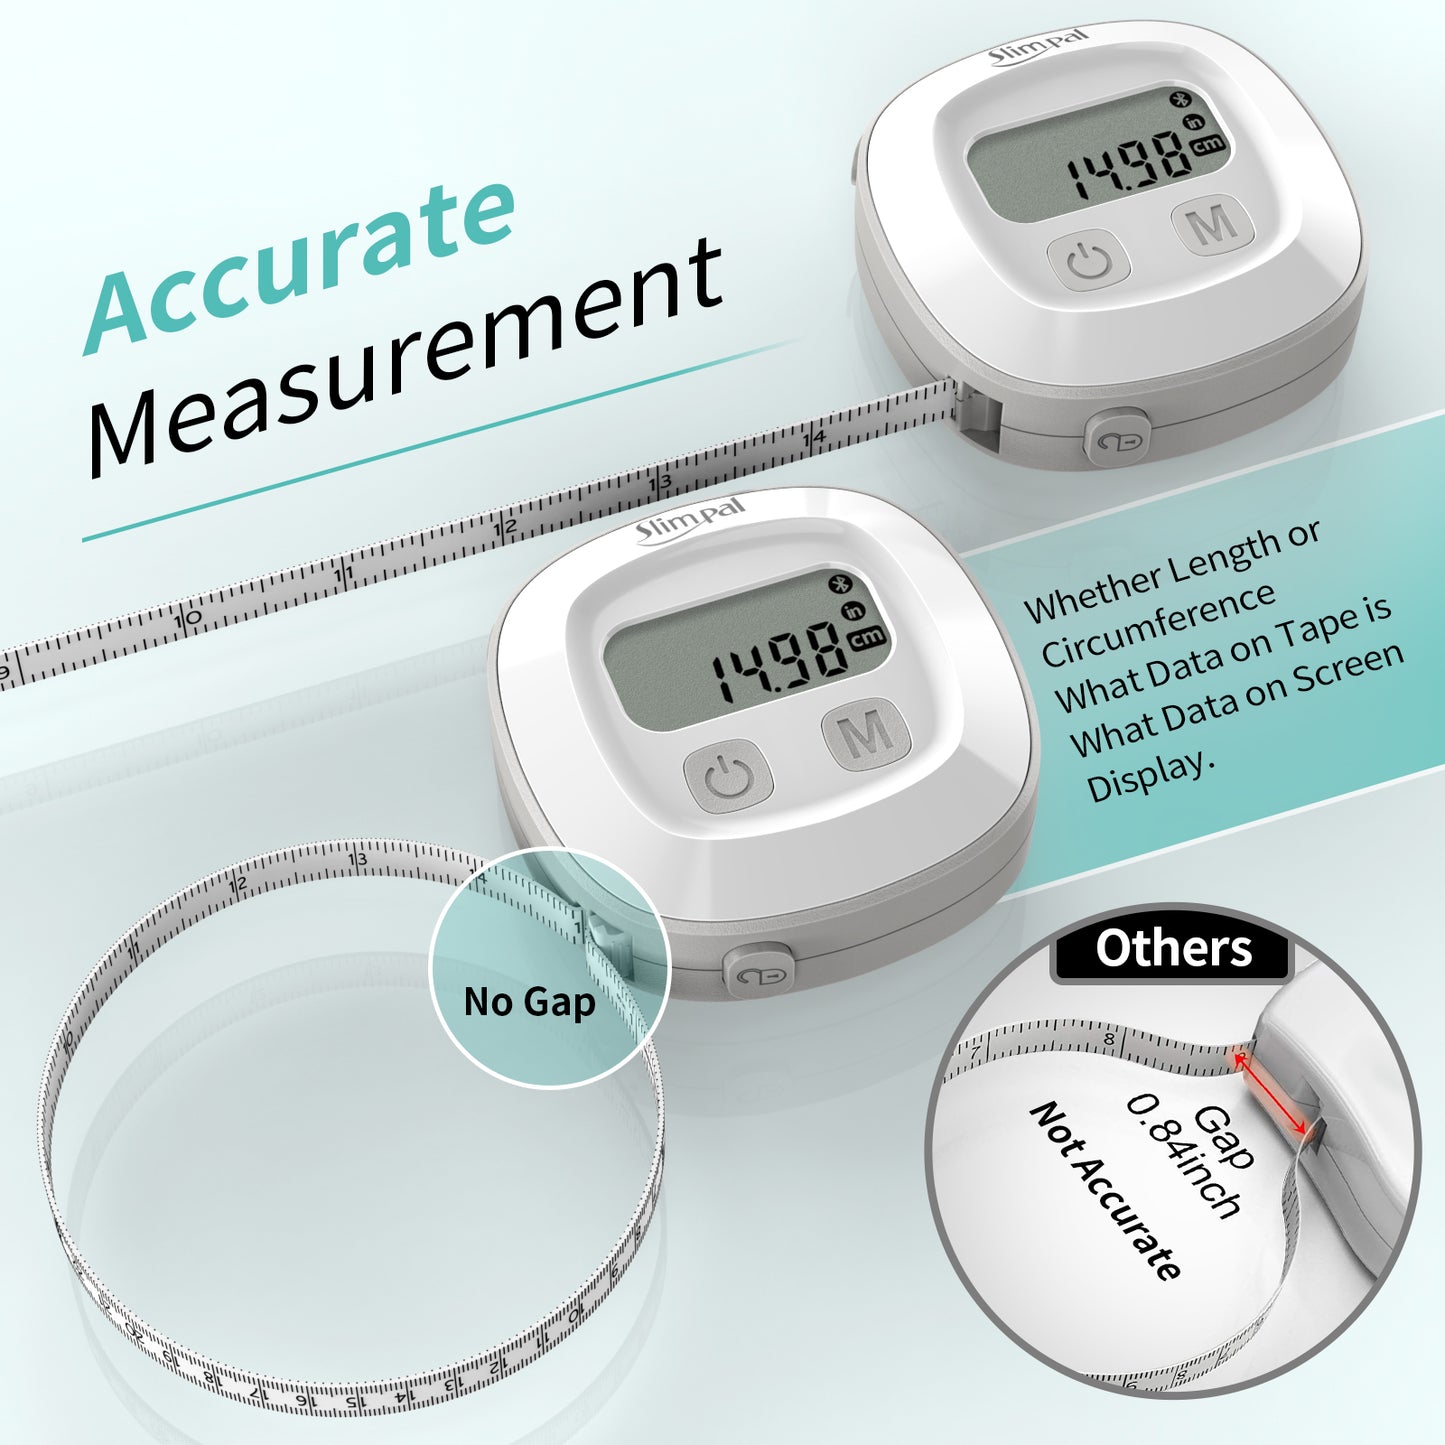 Slimpal Body Tape Measure with Case, Tool for Monitoring Body Fat, Measuring Tape for Body, Digital Smart Retractable Measuring Tape for Accurately Measuring BMI Fitness Body Shape and Weight-Loss